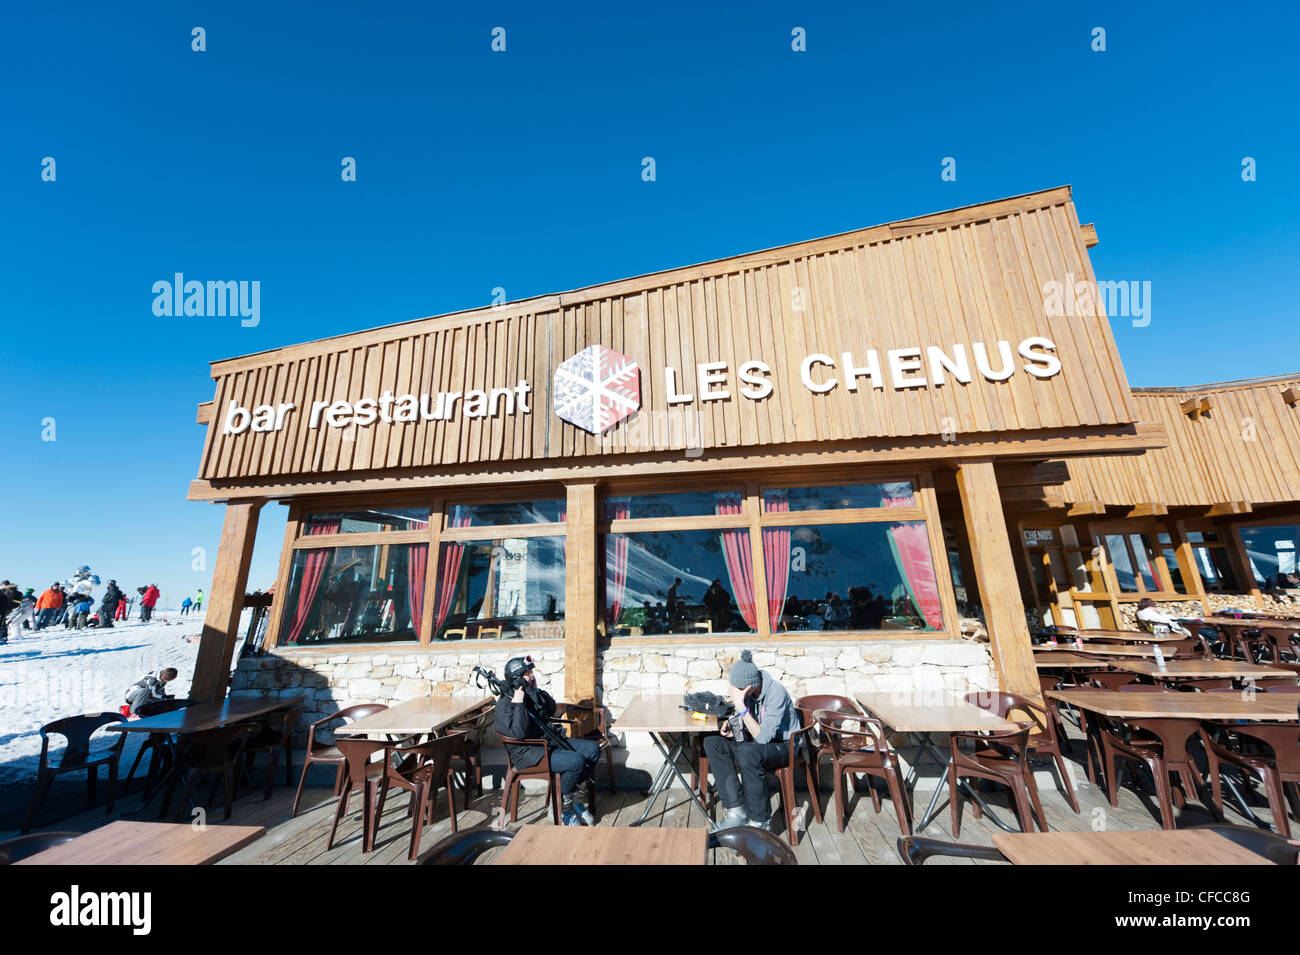 The Ineos Club House in the ski resort of Courchevel in the French Alps.  INEOS Stock Photo - Alamy